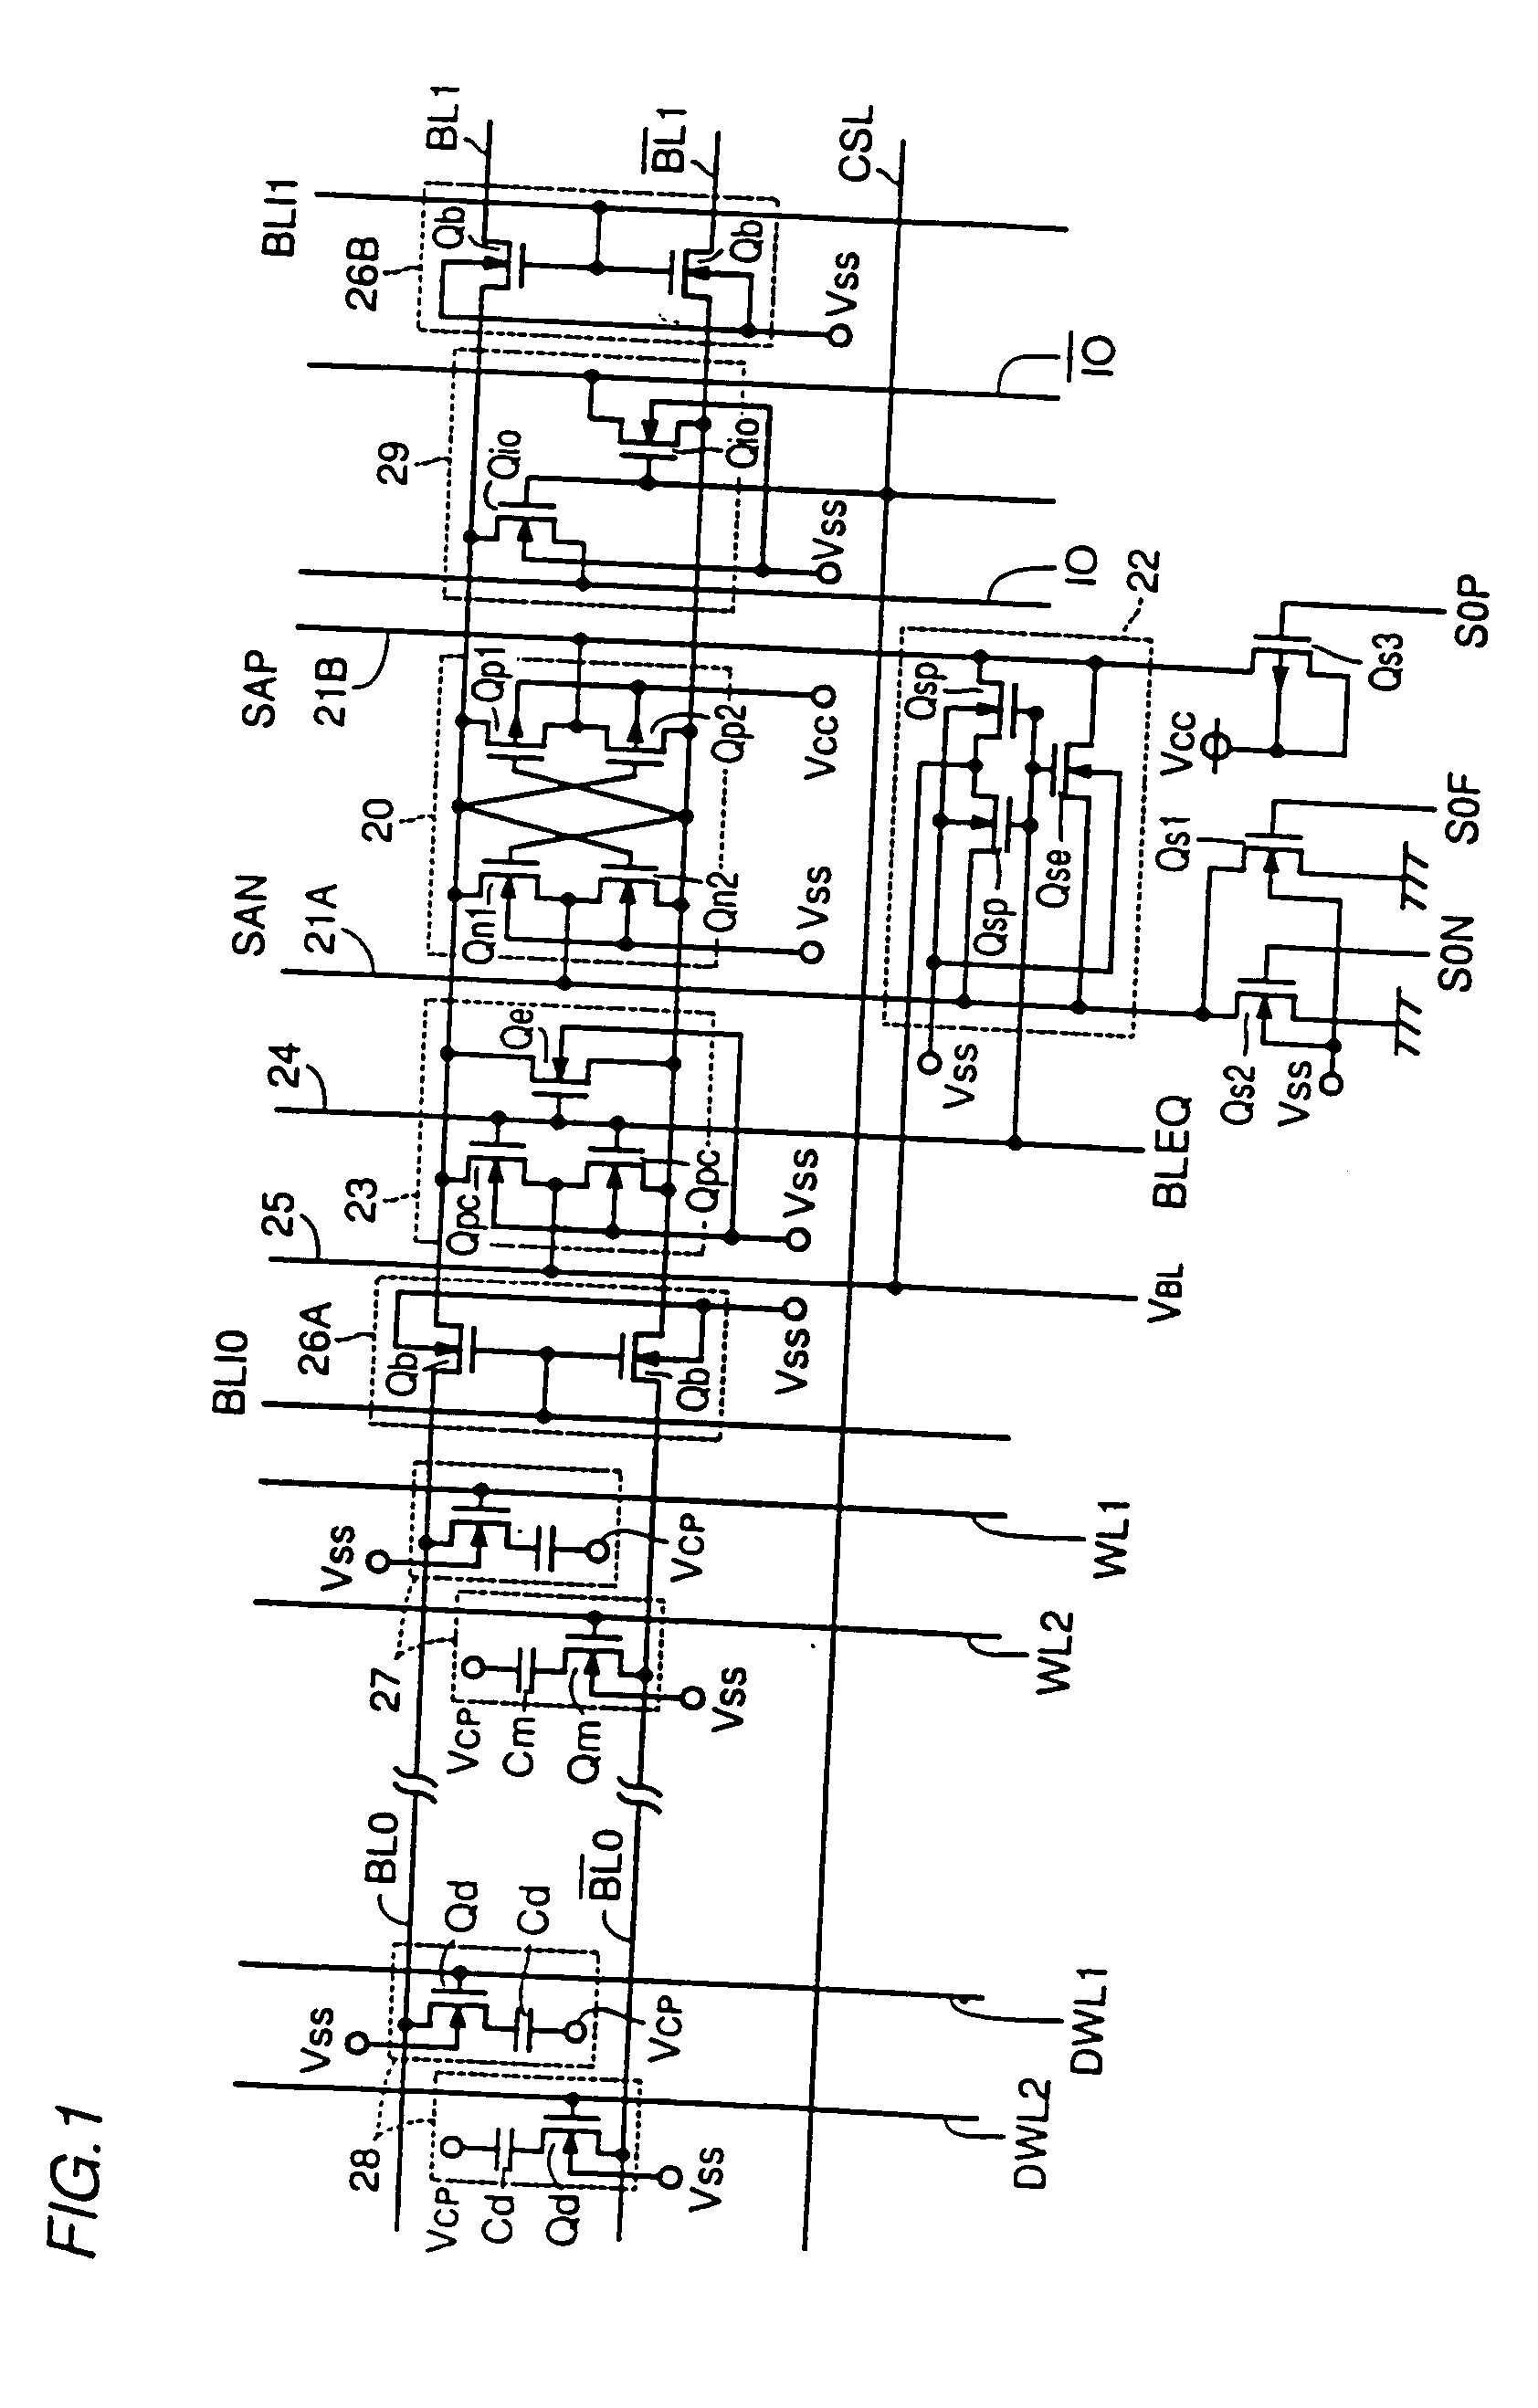 Semiconductor memory device including an SOI substrate